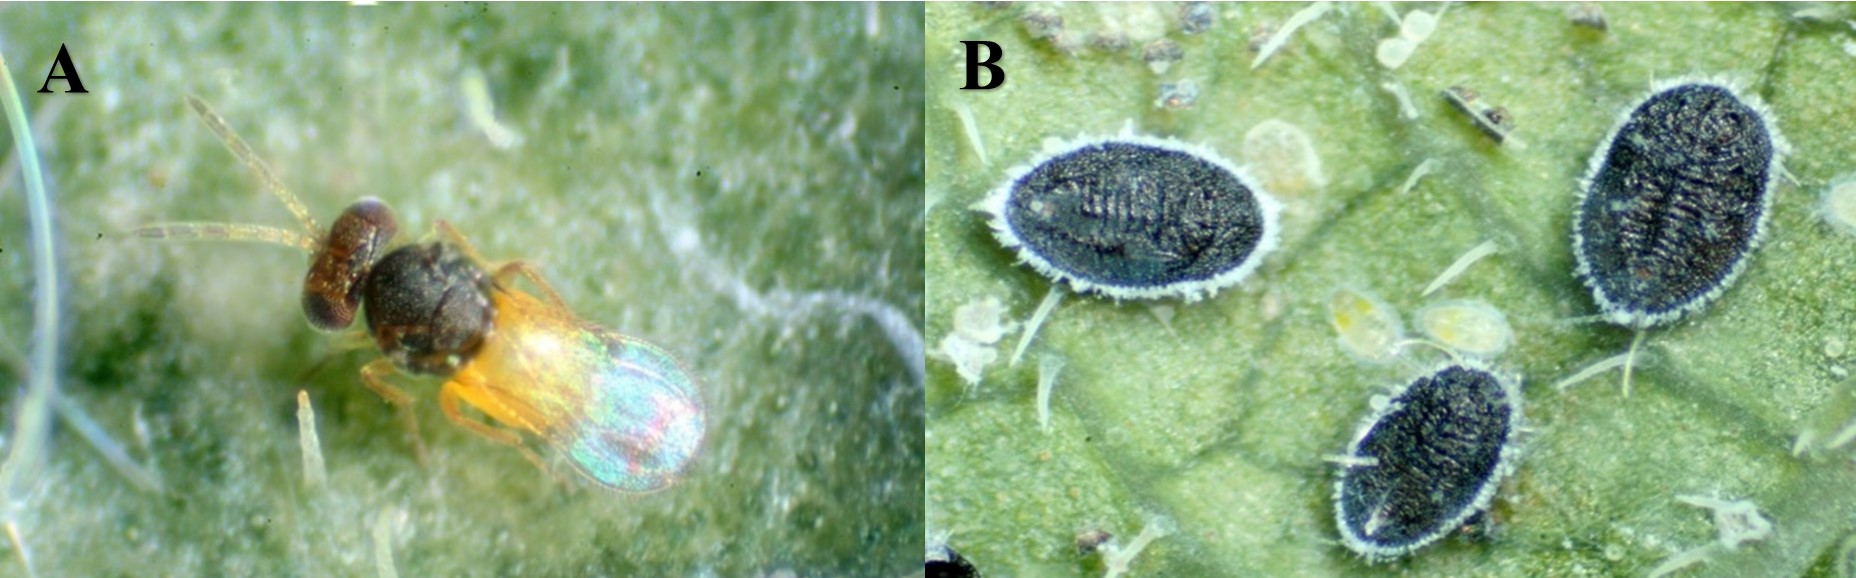 Figure 9. Whitefly parasitoid, Encarsia formosa (A), and parasitized whitefly nymphs (B). (Photo Credit: David Cappaert, Bugwood.org. Note: images not to scale.)